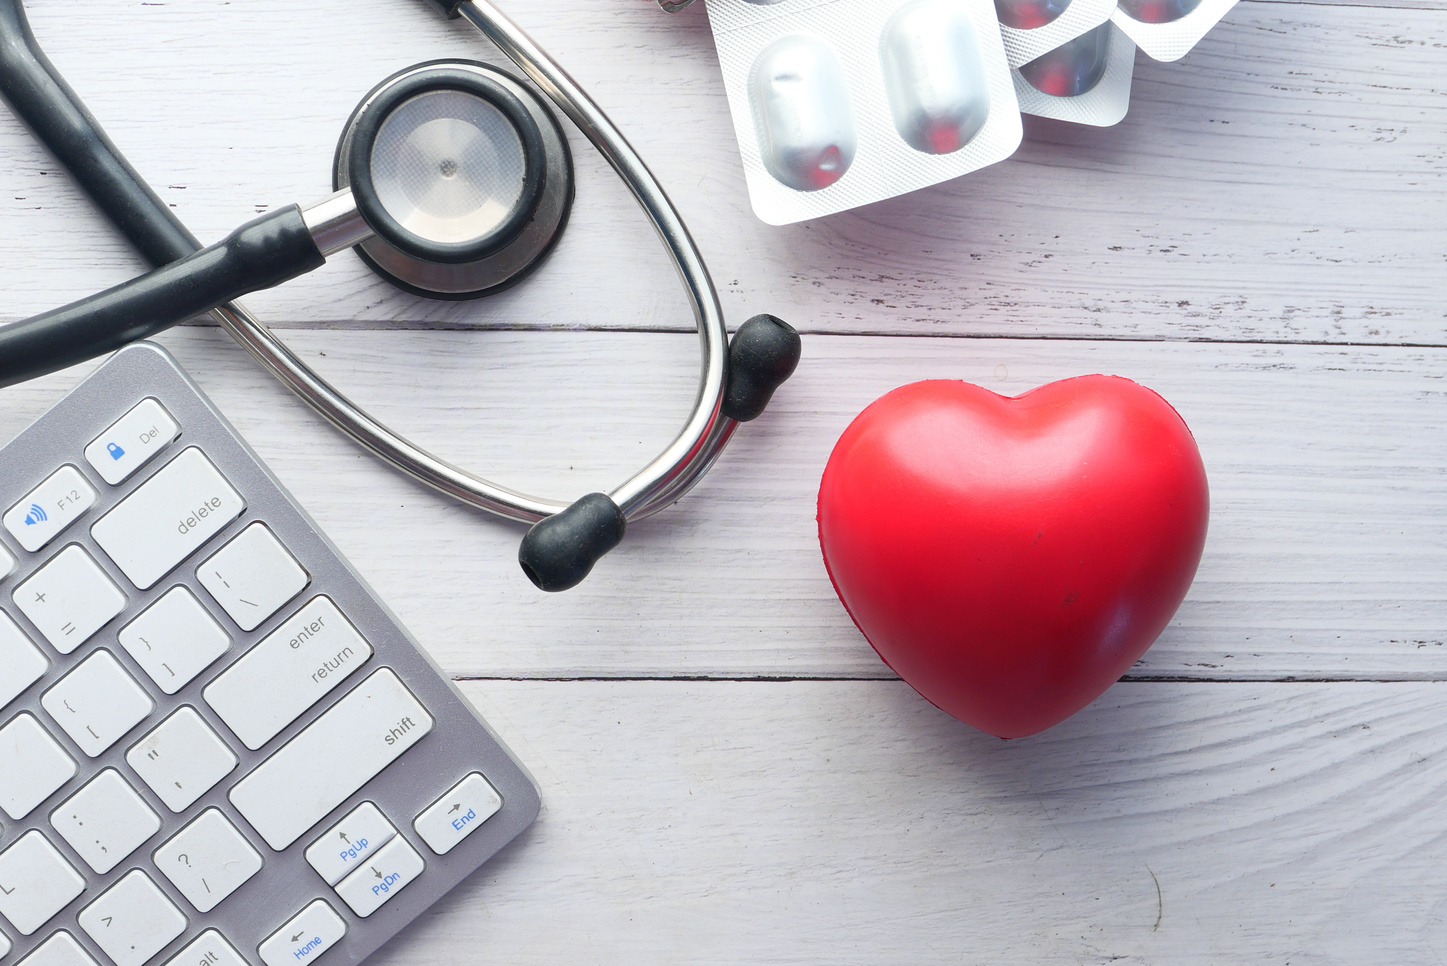 Keyboard, Heart, and Stethoscope on White Background